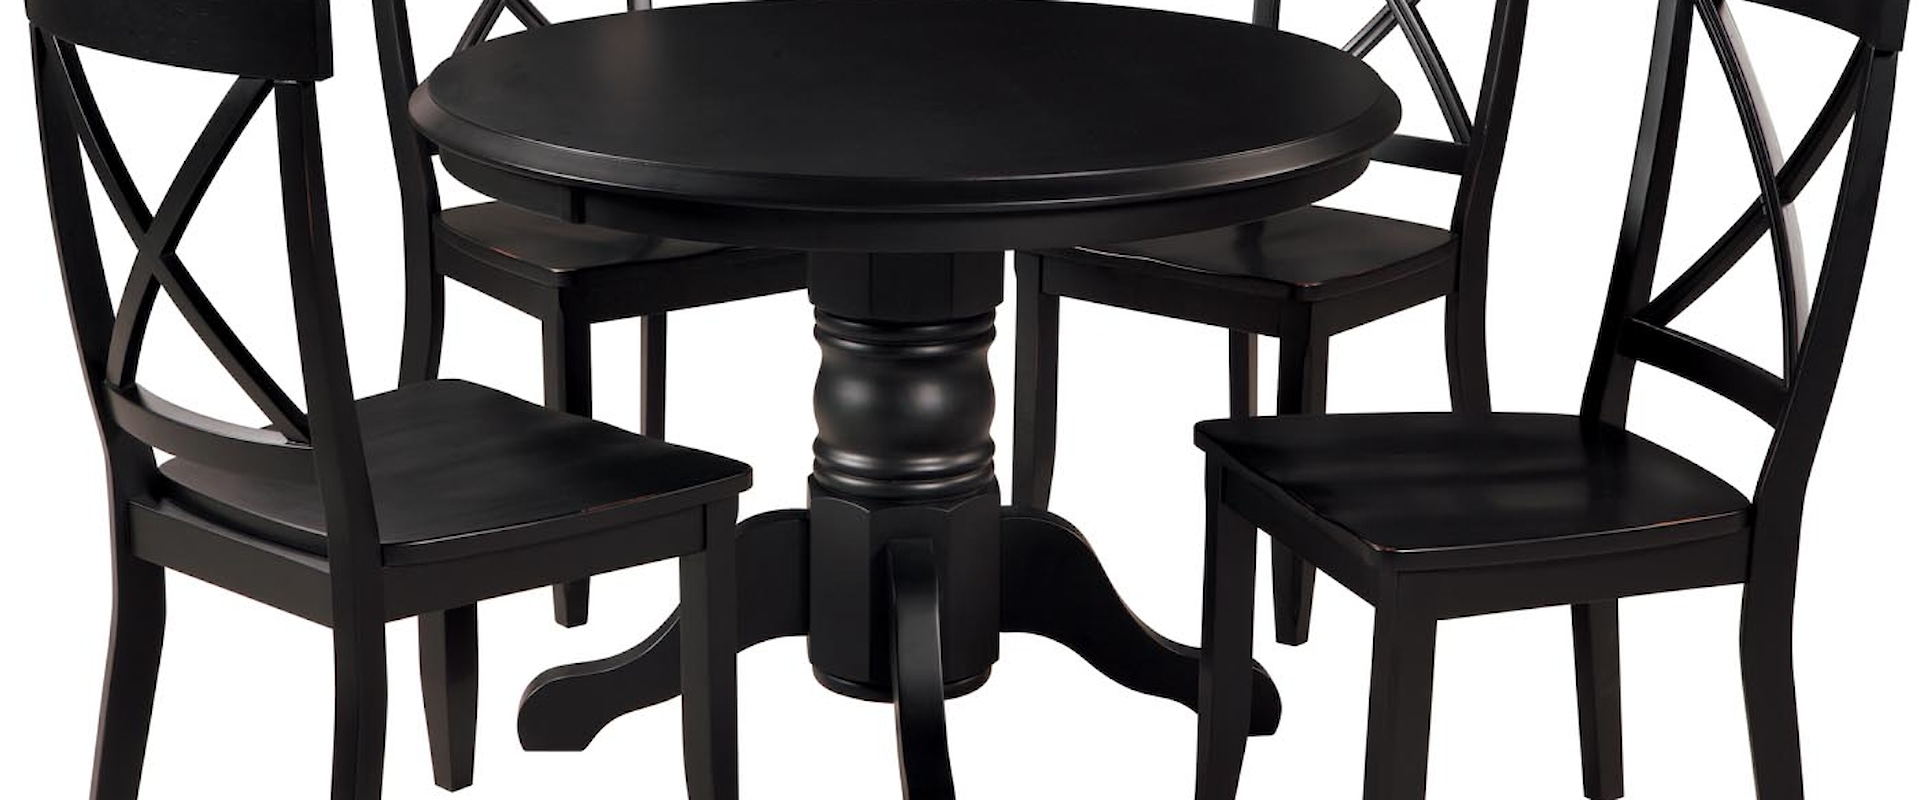 Traditional 5-Piece Dining Set